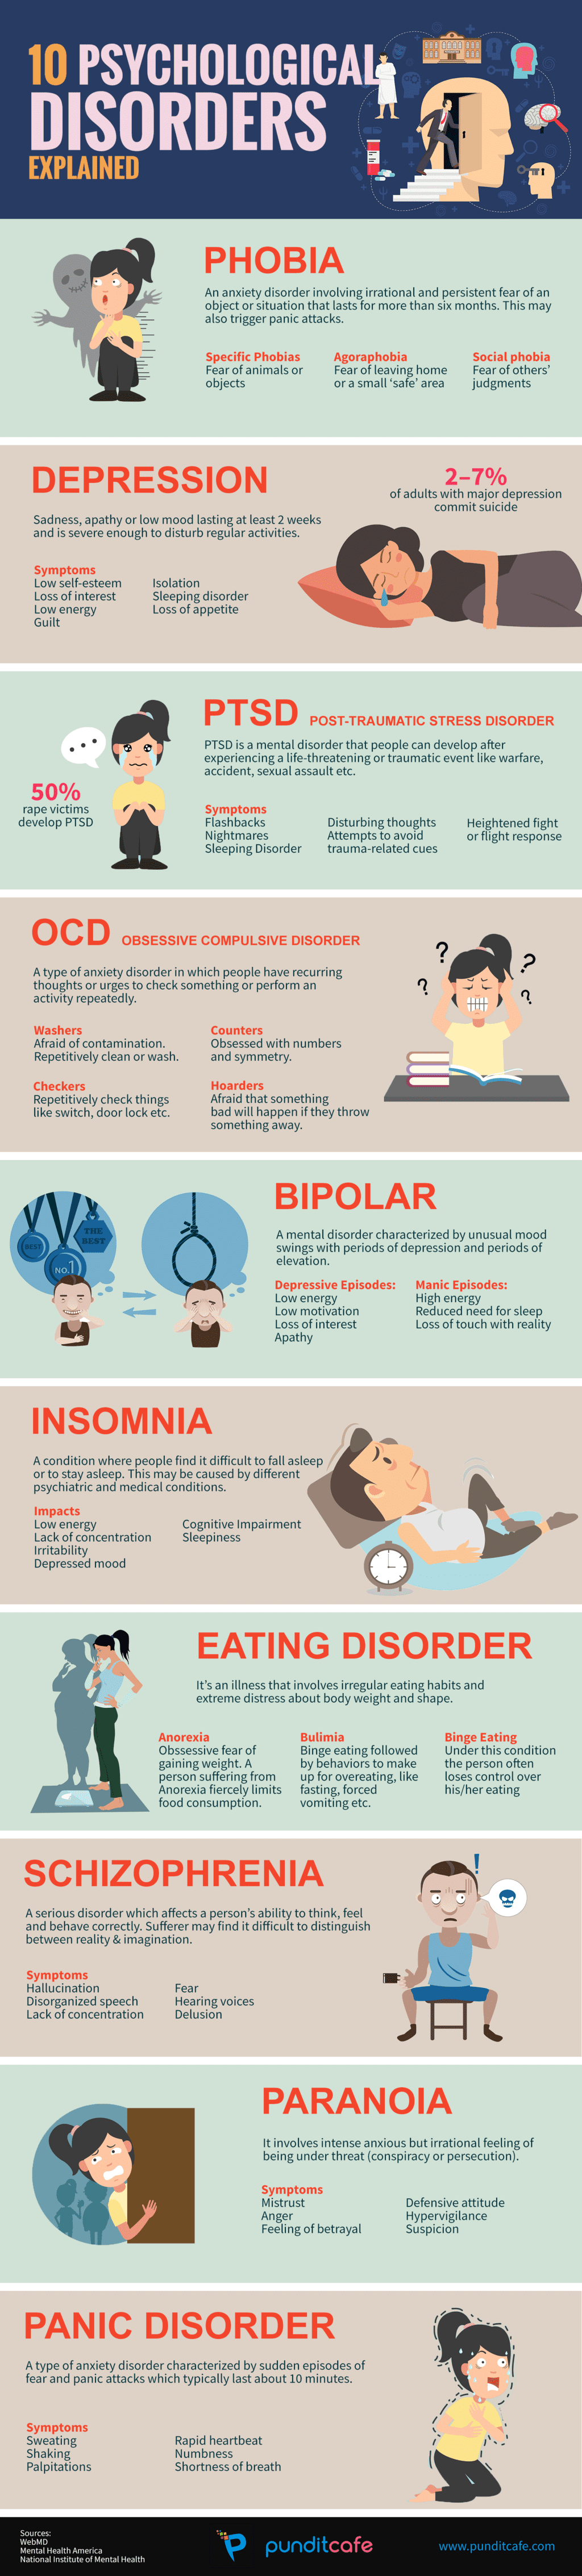 10 Psychological Disorders Explained #Infographic - Visualistan